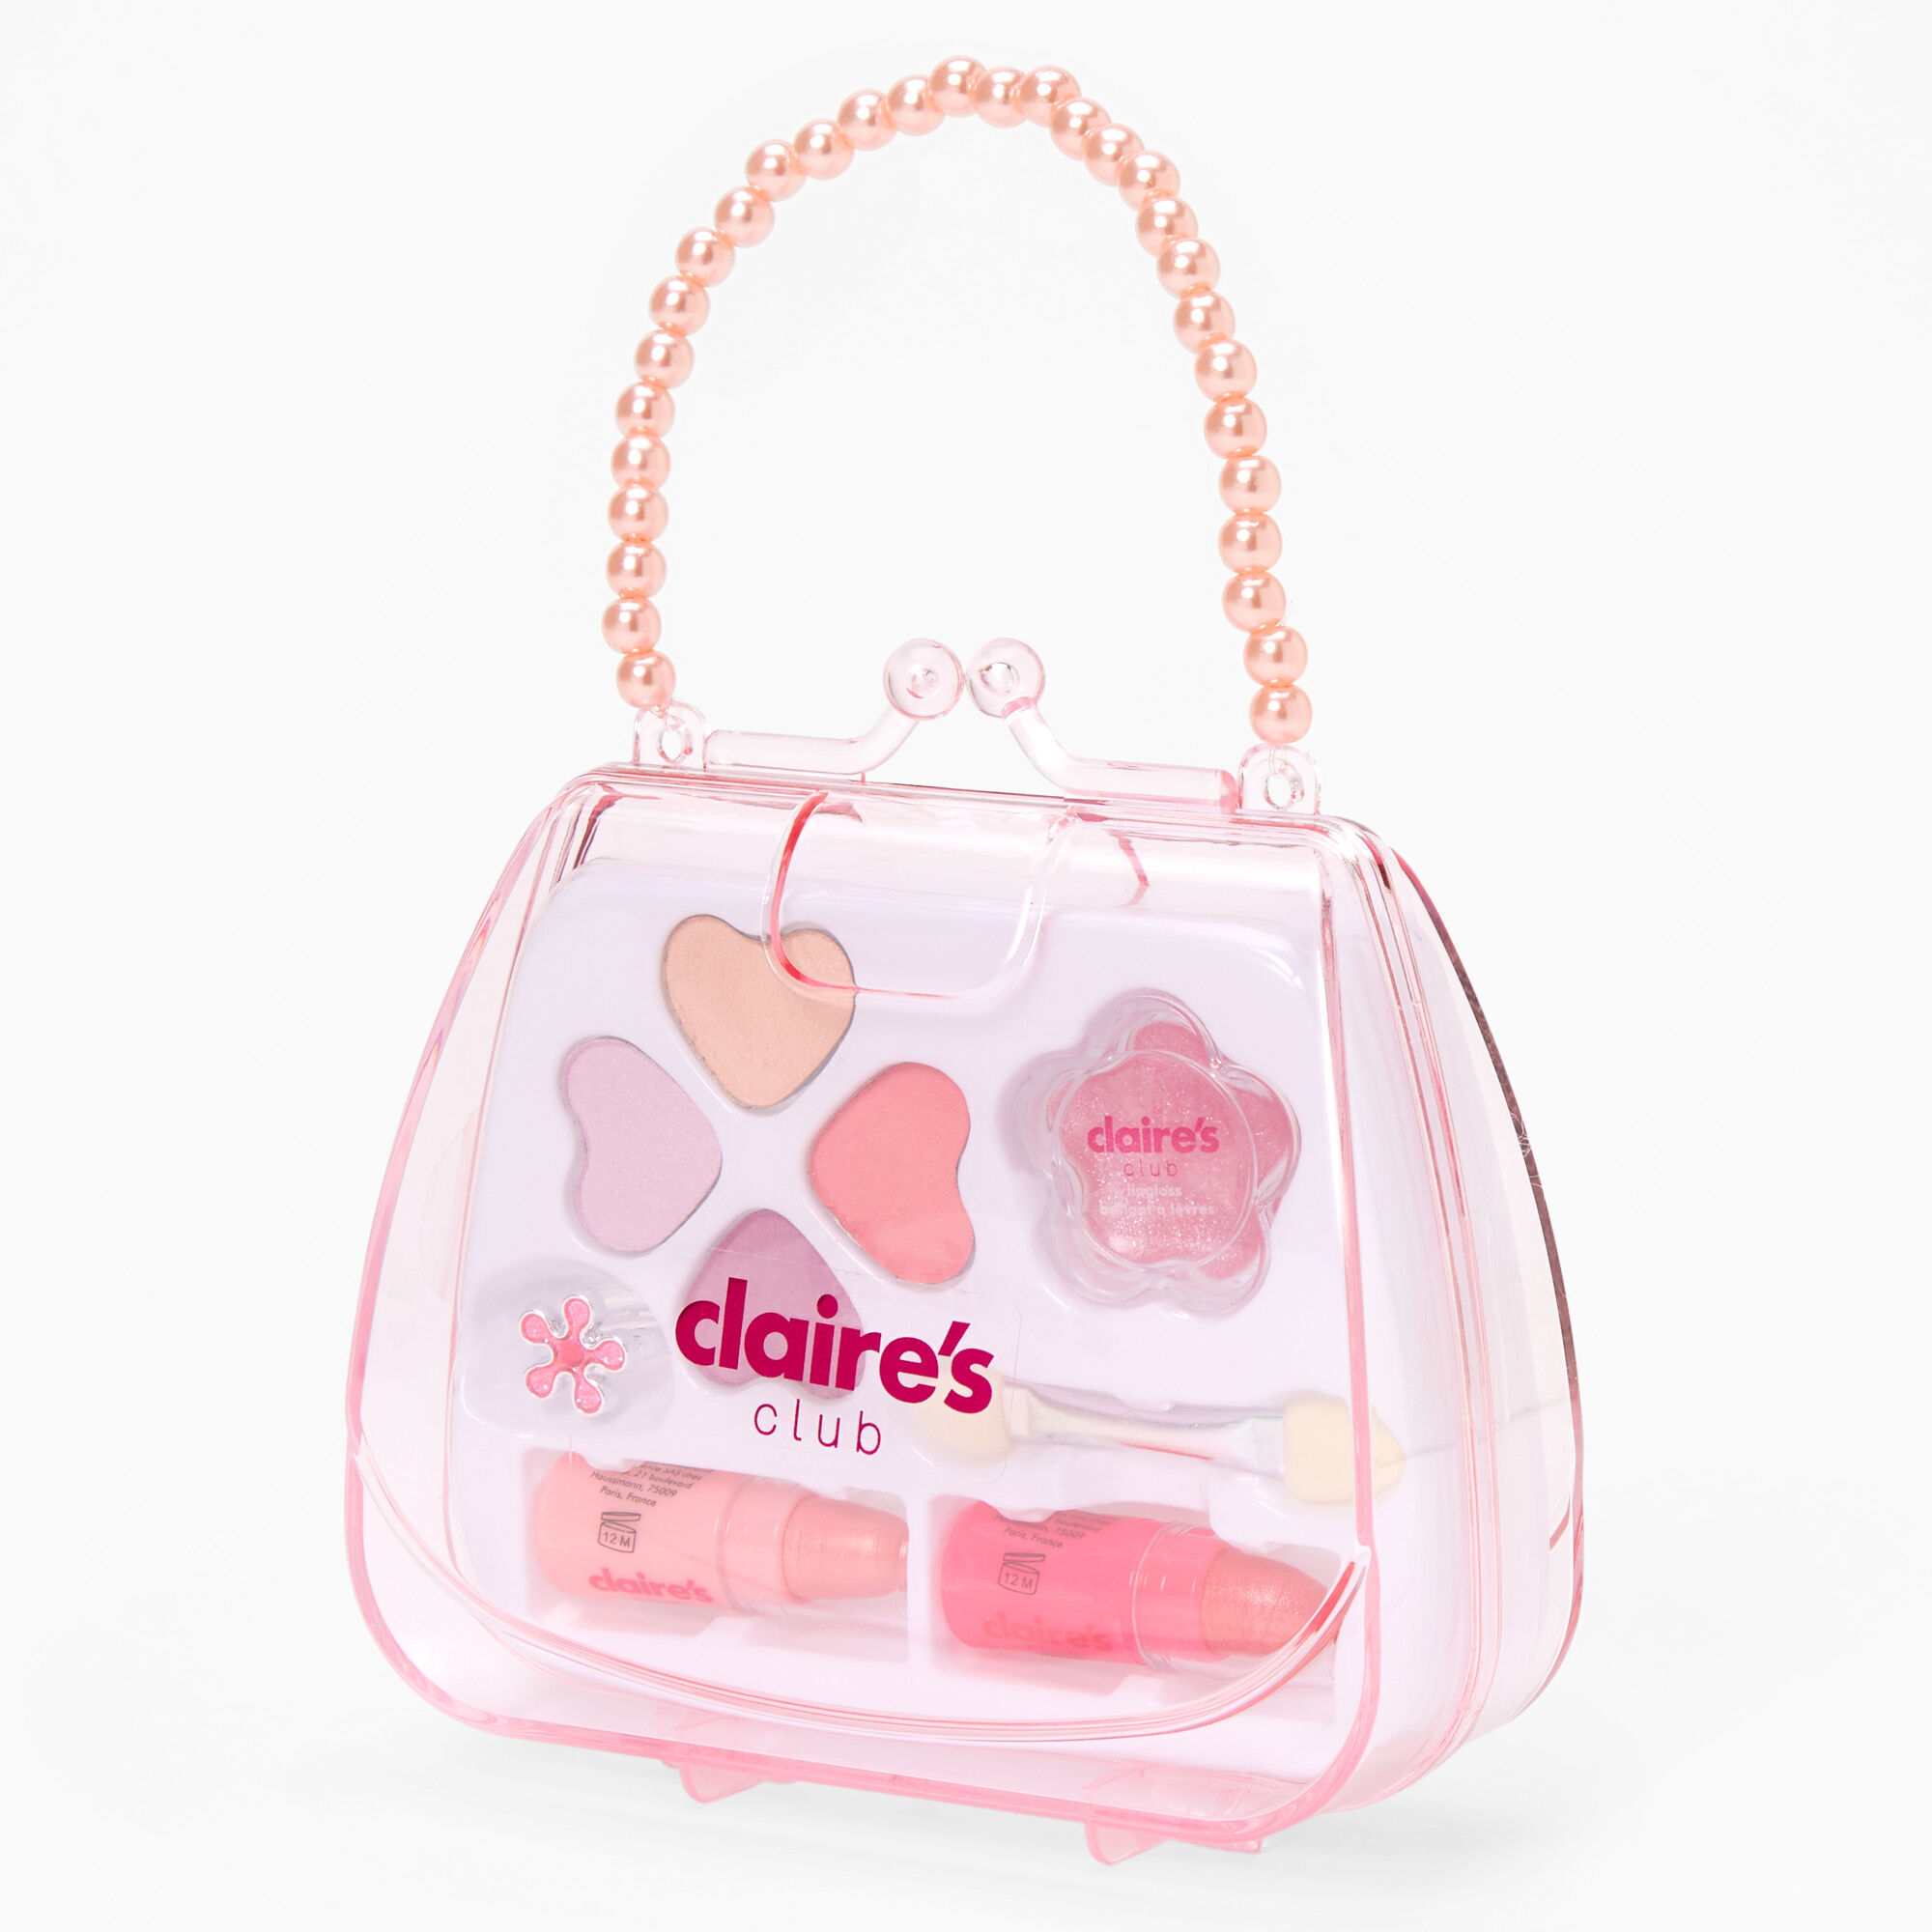 View Claires Club Pearl Purse Makeup Set Pink information